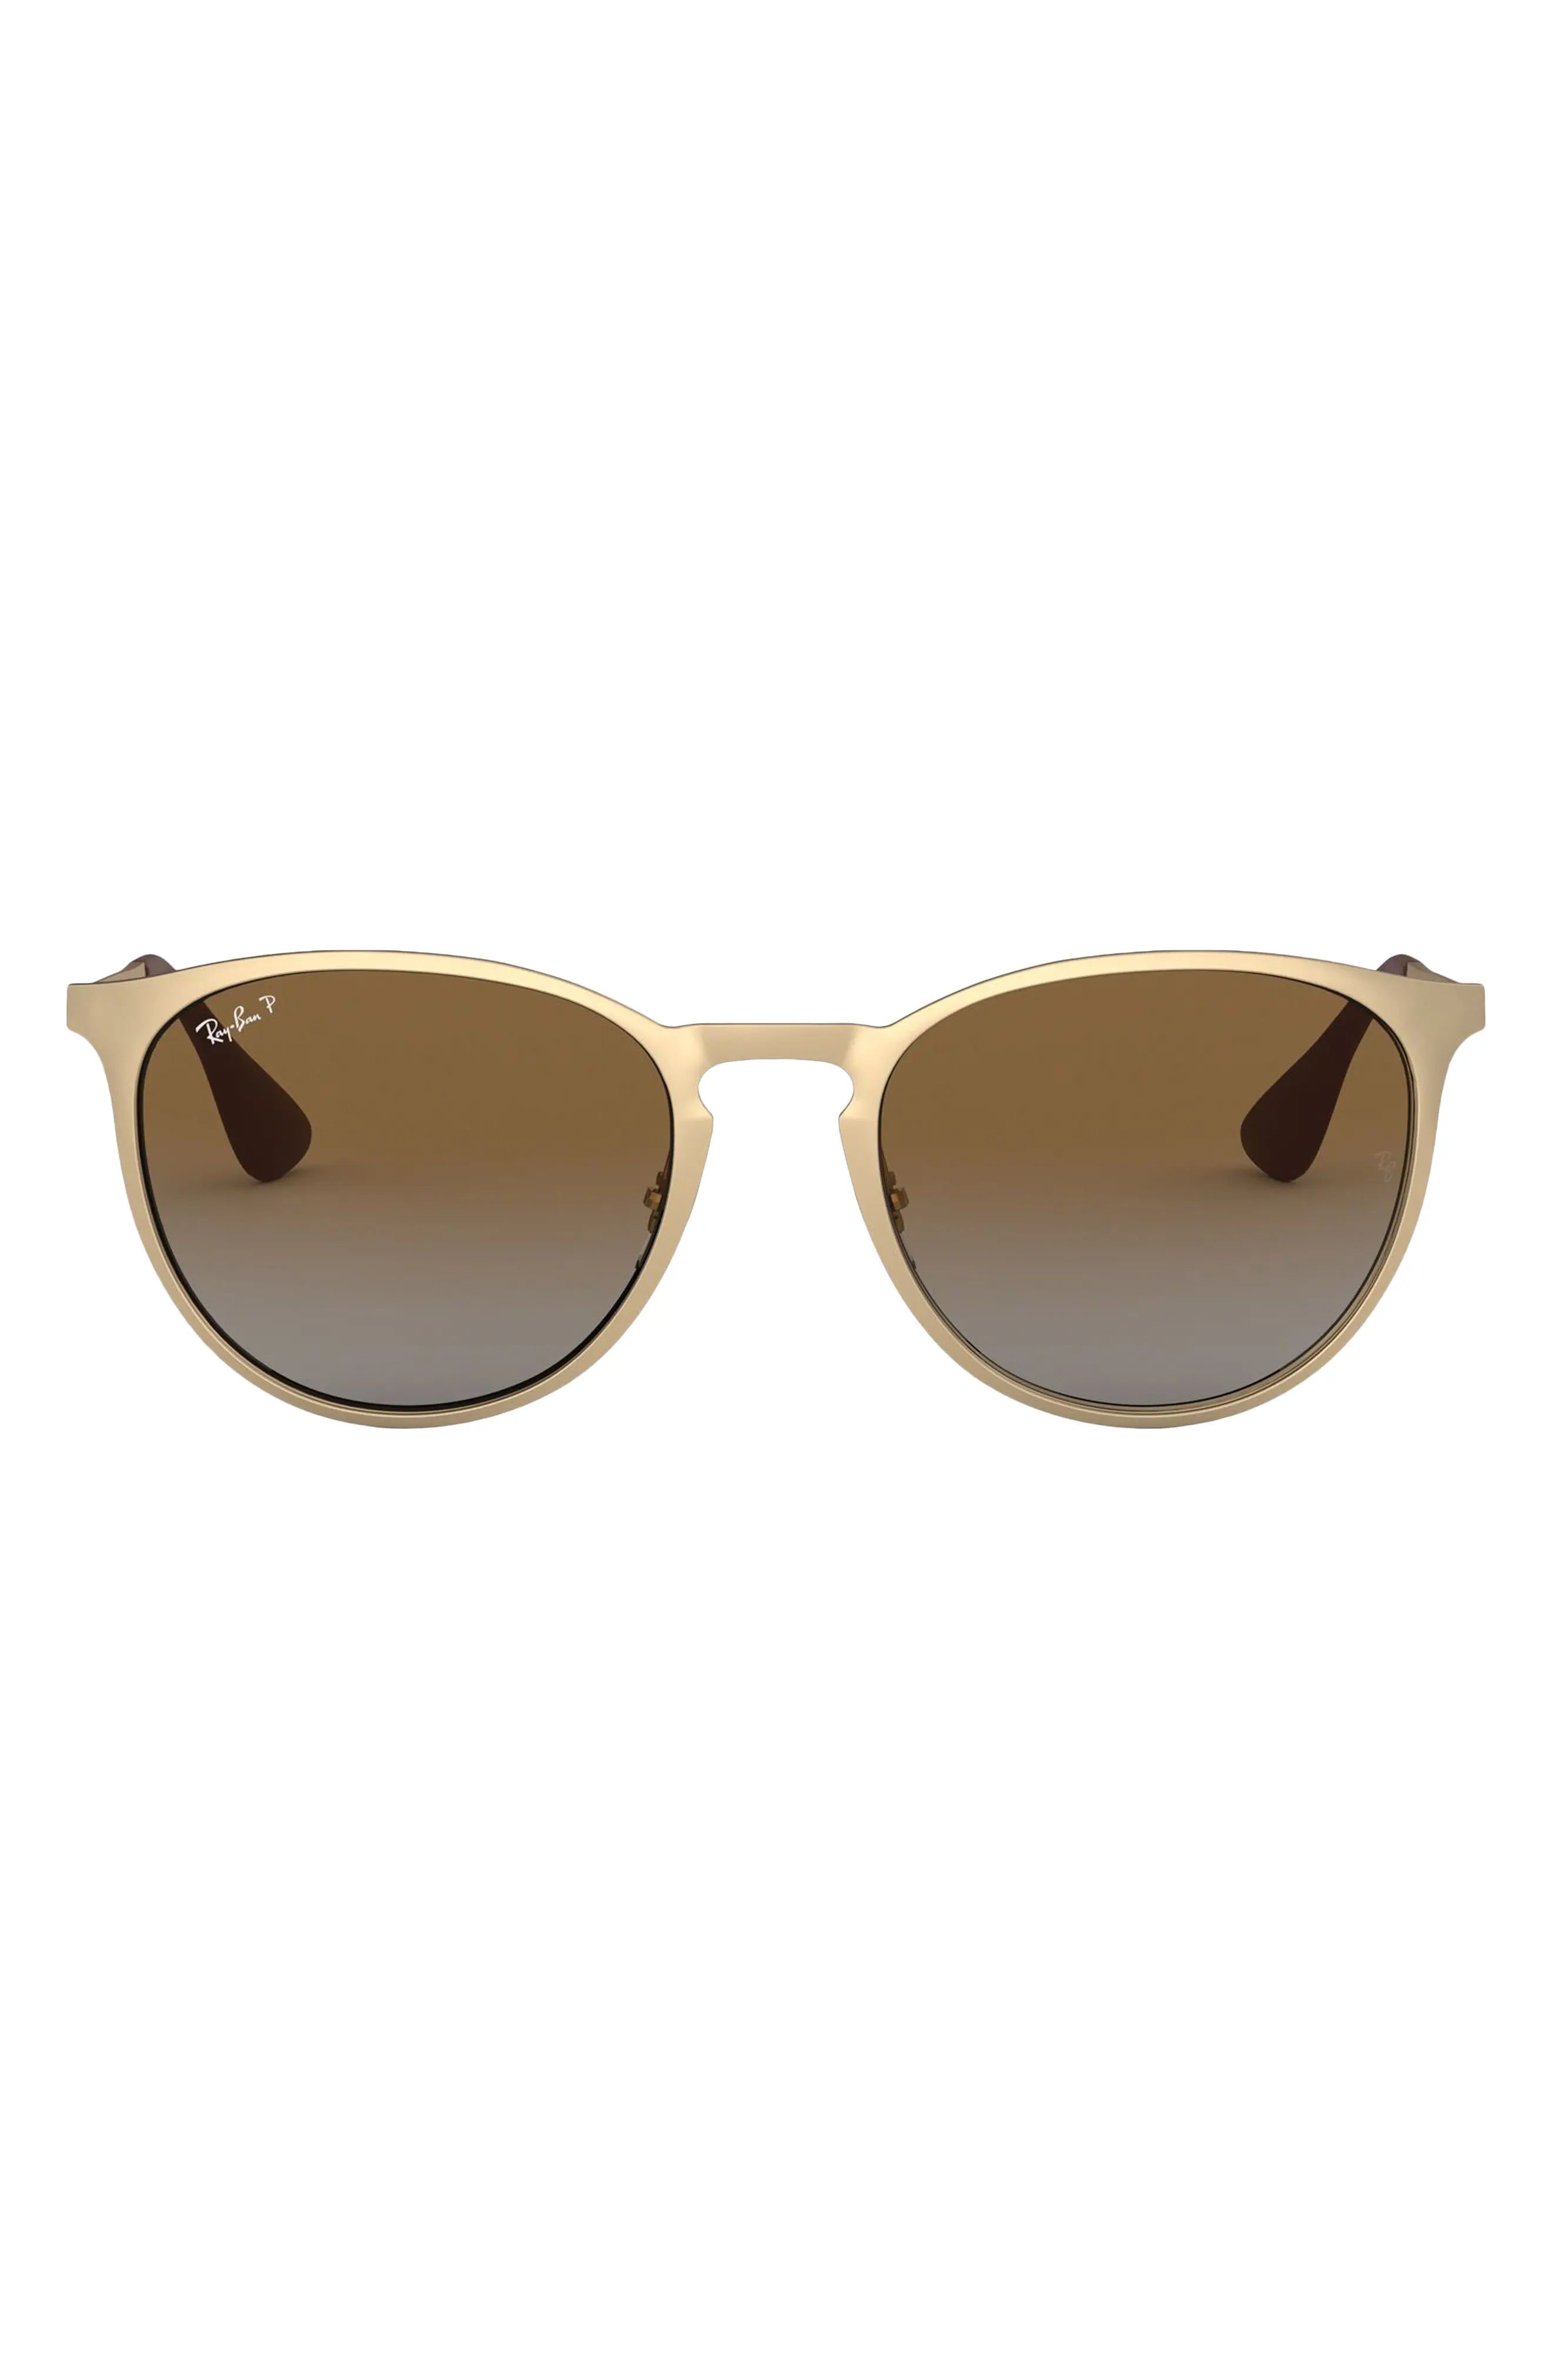 Ray-Ban Erika 54mm Sunglasses in Matte Gold at Nordstrom | Nordstrom